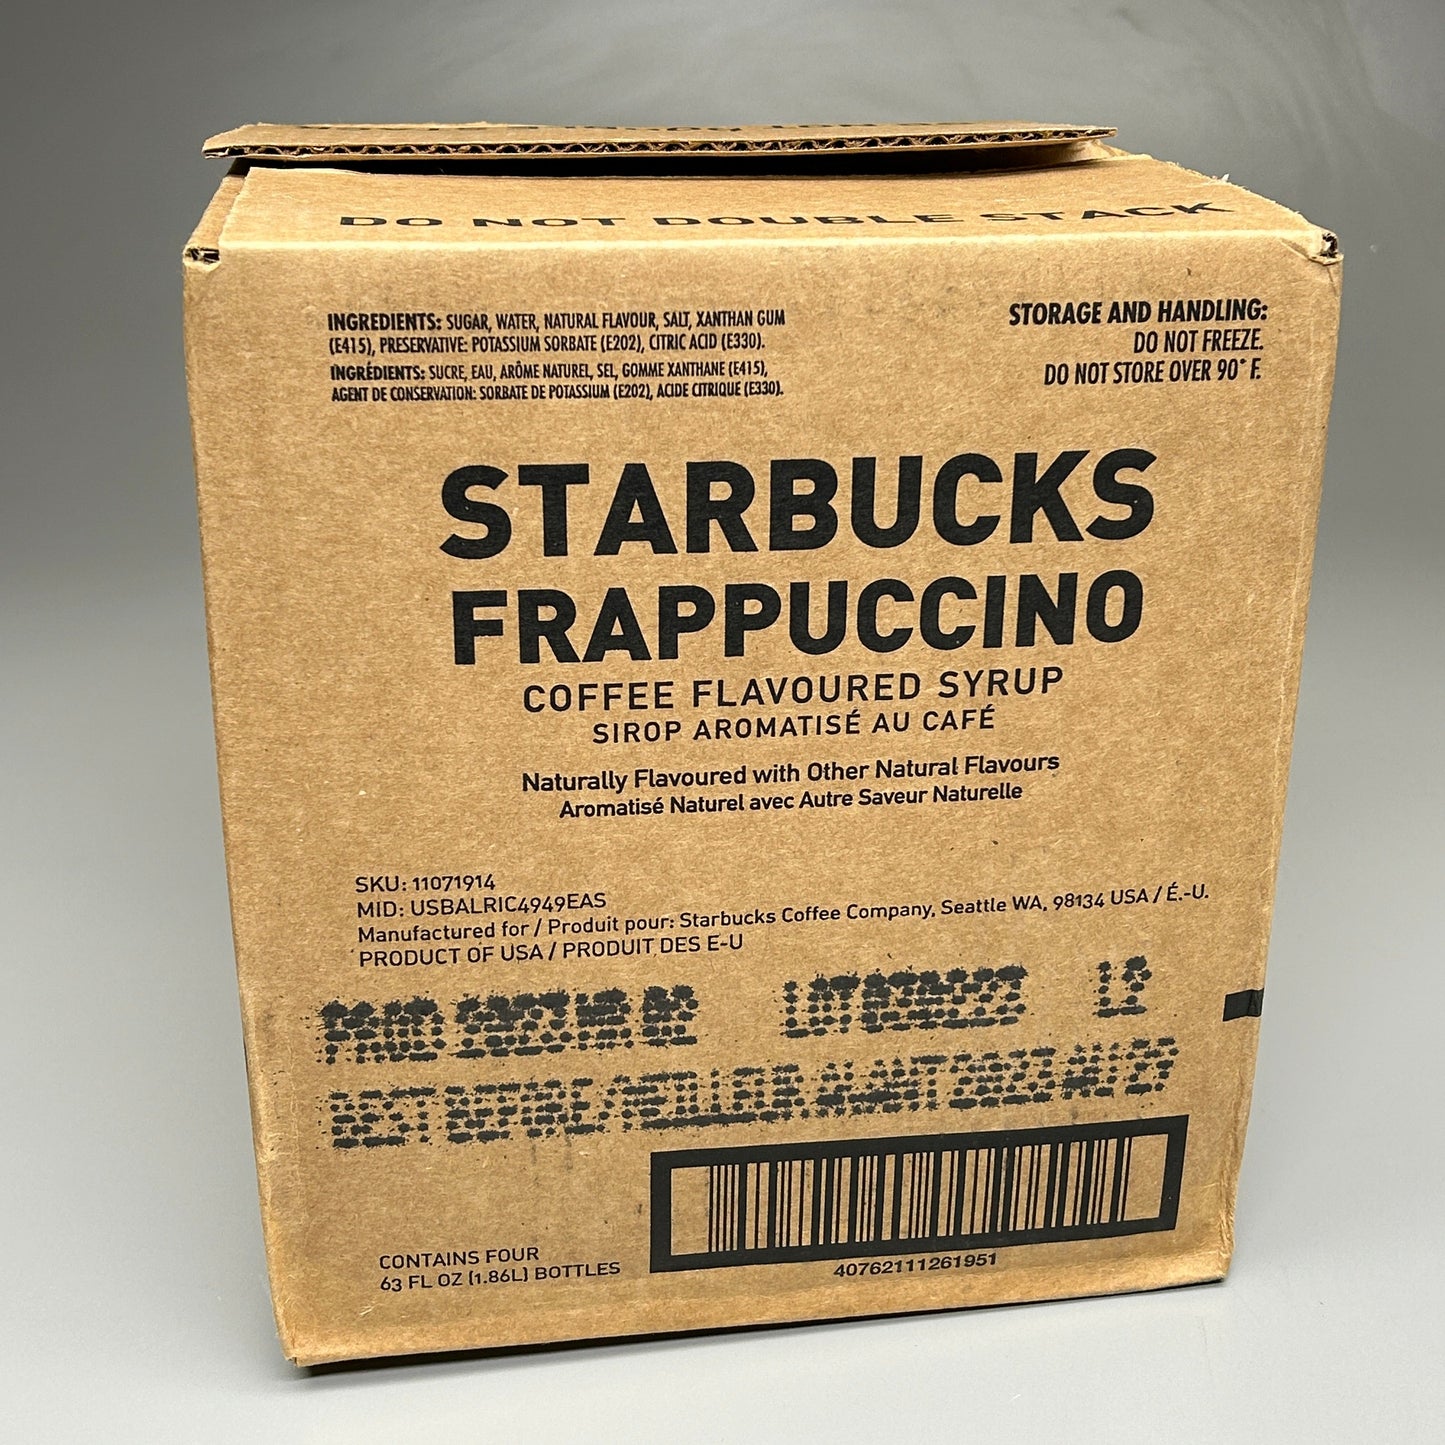 ZA@ STARBUCKS 4-PACK! Frappuccino Syrup Coffee Flavored Syrup (1.86 L/bottle) 8/23 (New) E